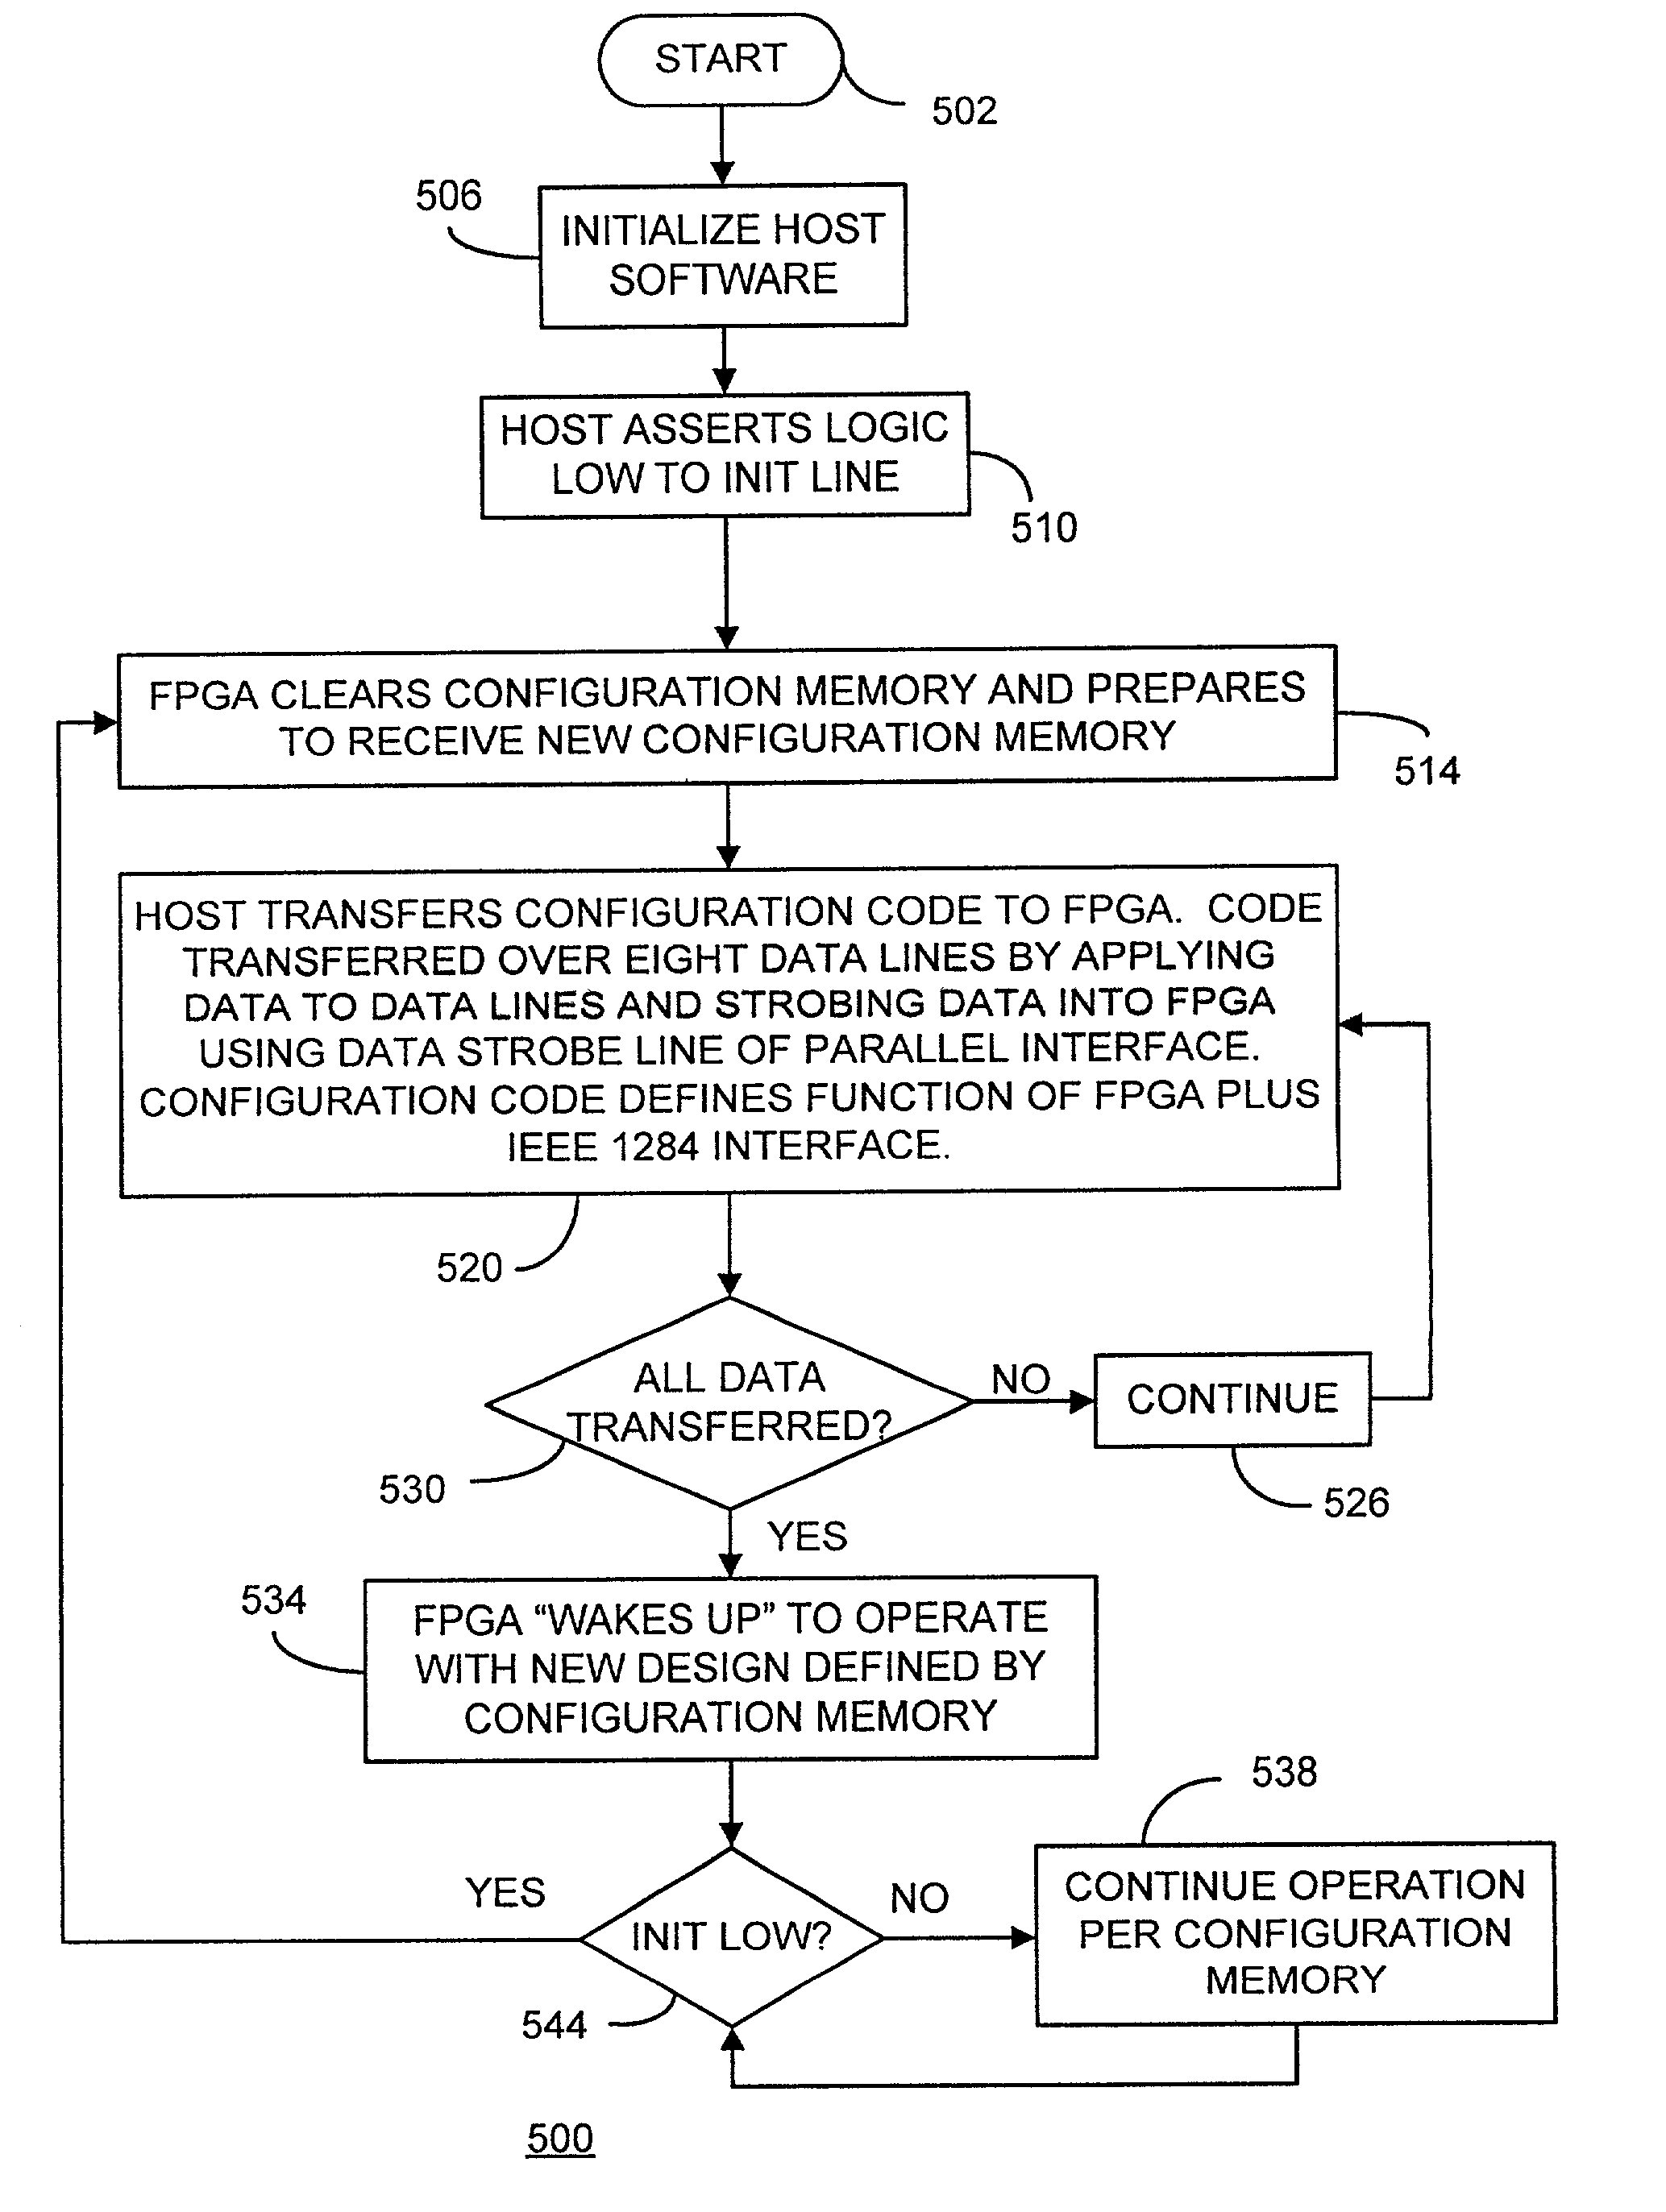 Host to FPGA interface in an in-circuit emulation system